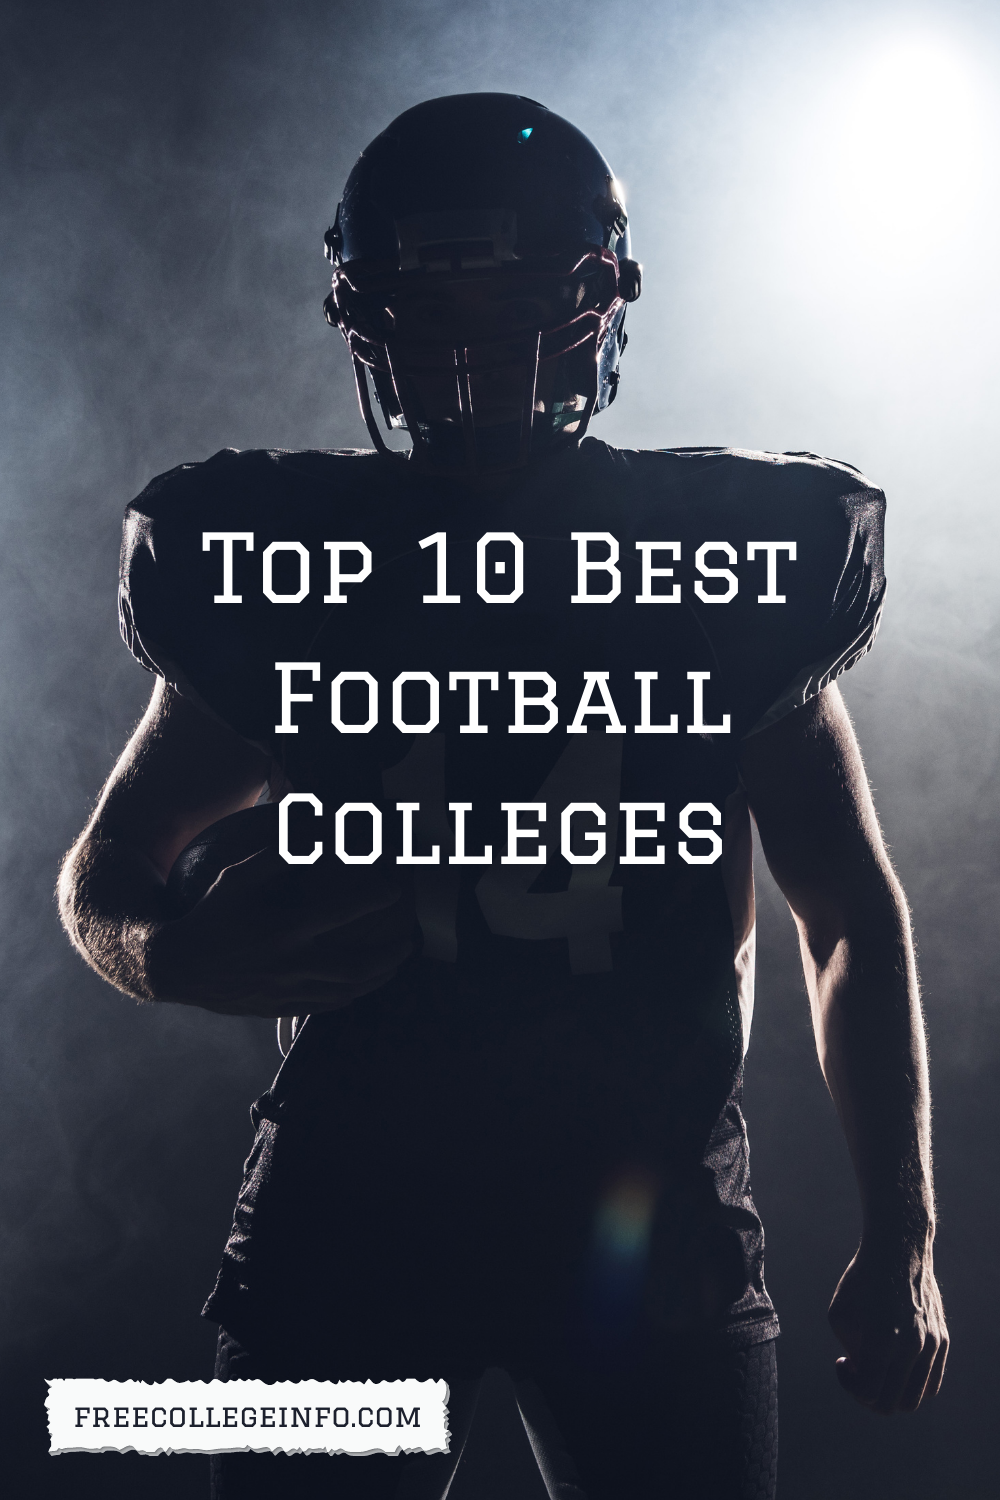 Top 10 Best Football Colleges